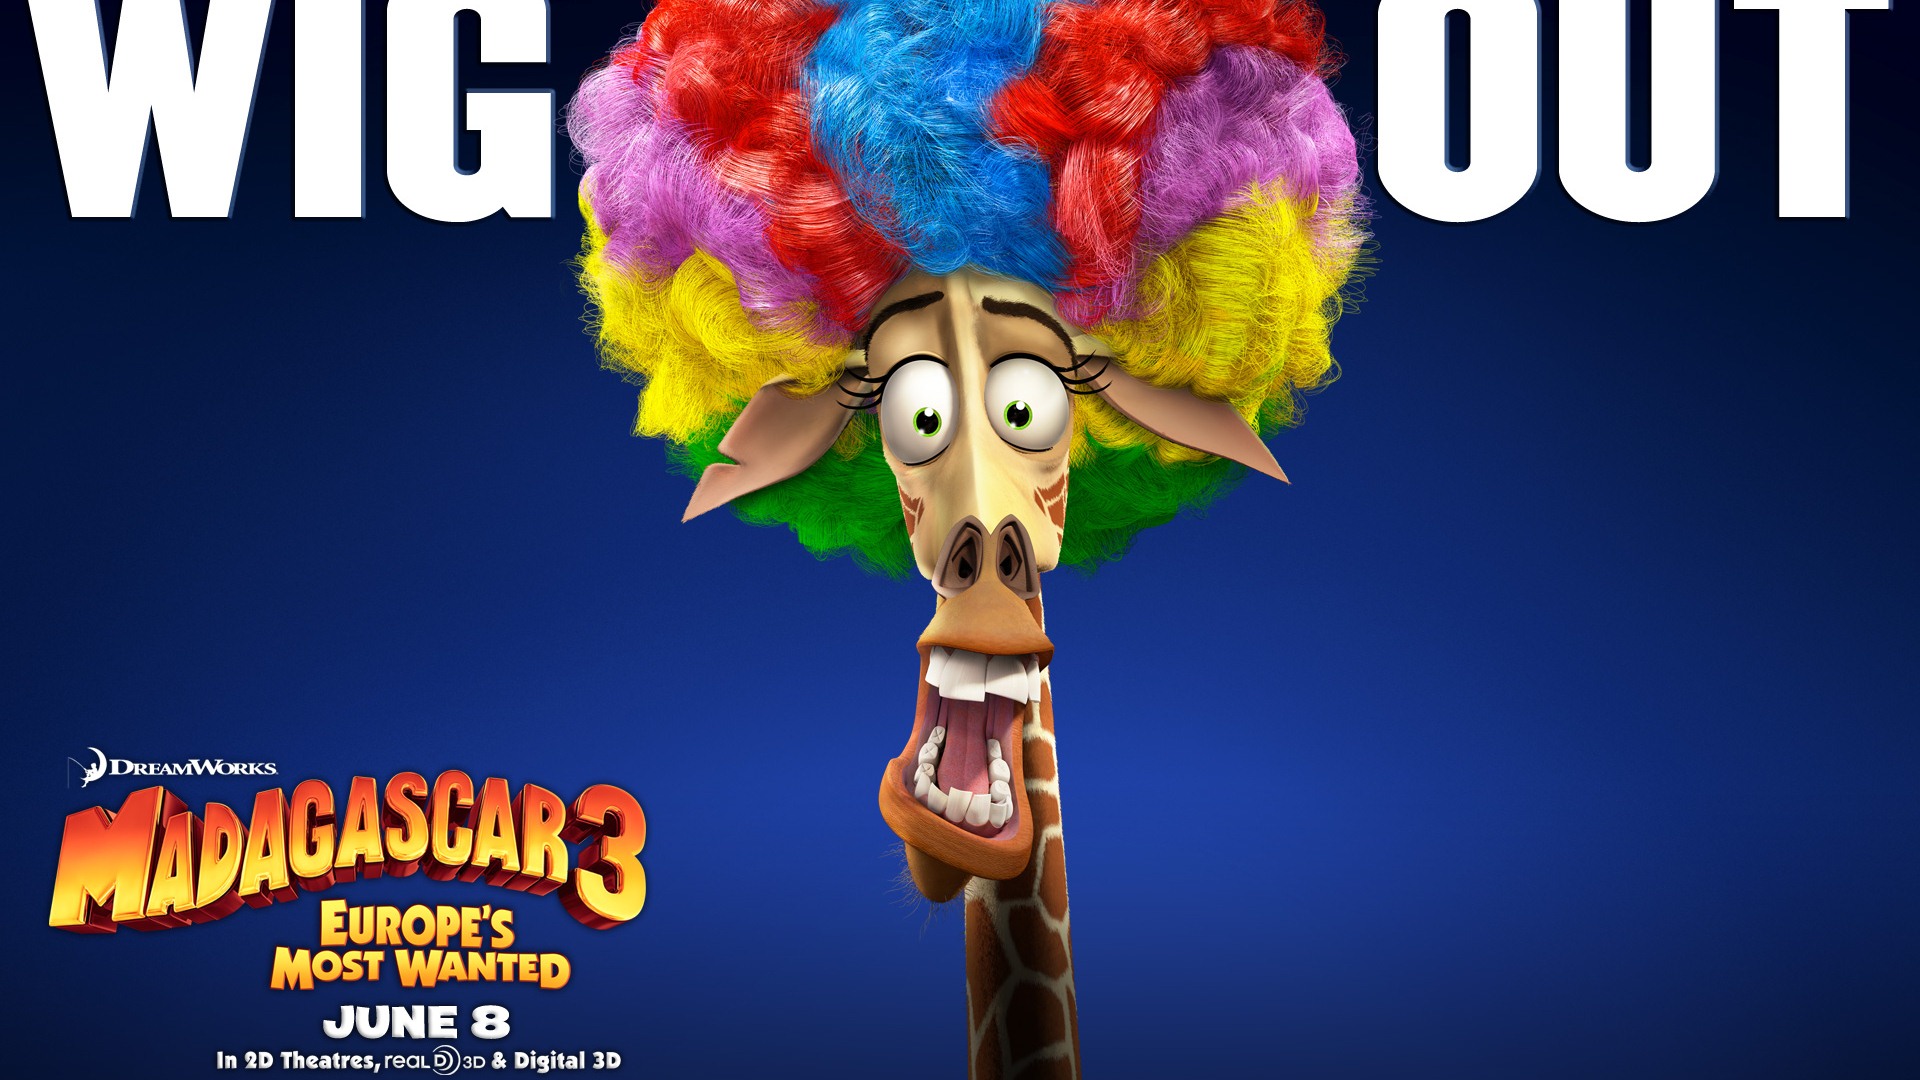 Madagascar 3: Europe's Most Wanted HD wallpapers #14 - 1920x1080